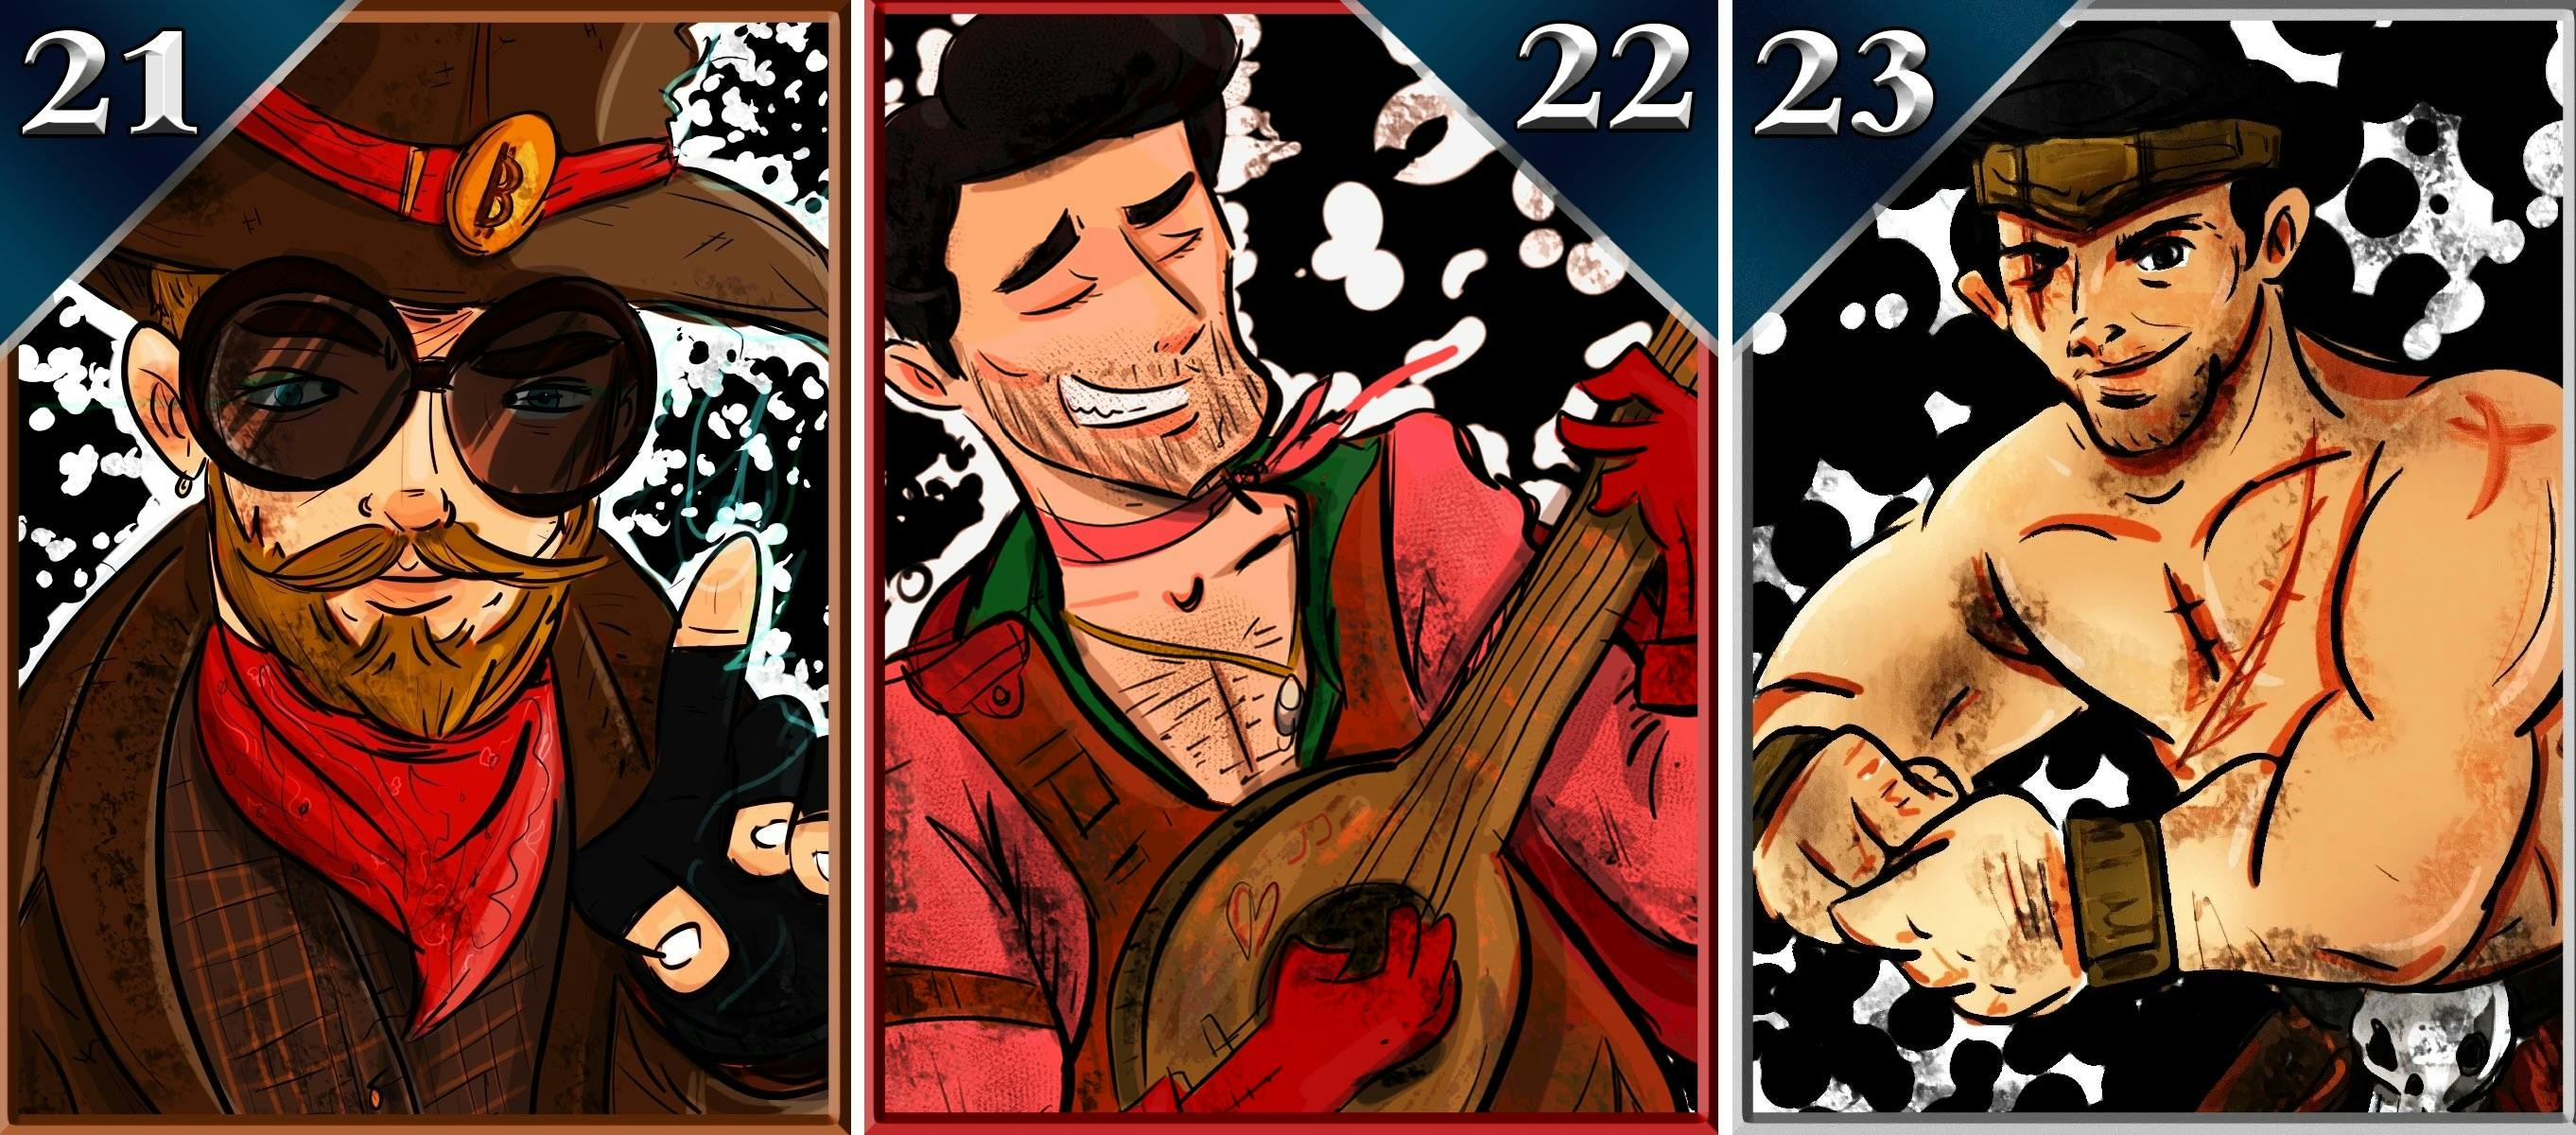 The three Curio Cards founders in their cartoon forms: Mad Bitcoins, Travis Uhrig, and Rhett Creighton. Art by Robek World.